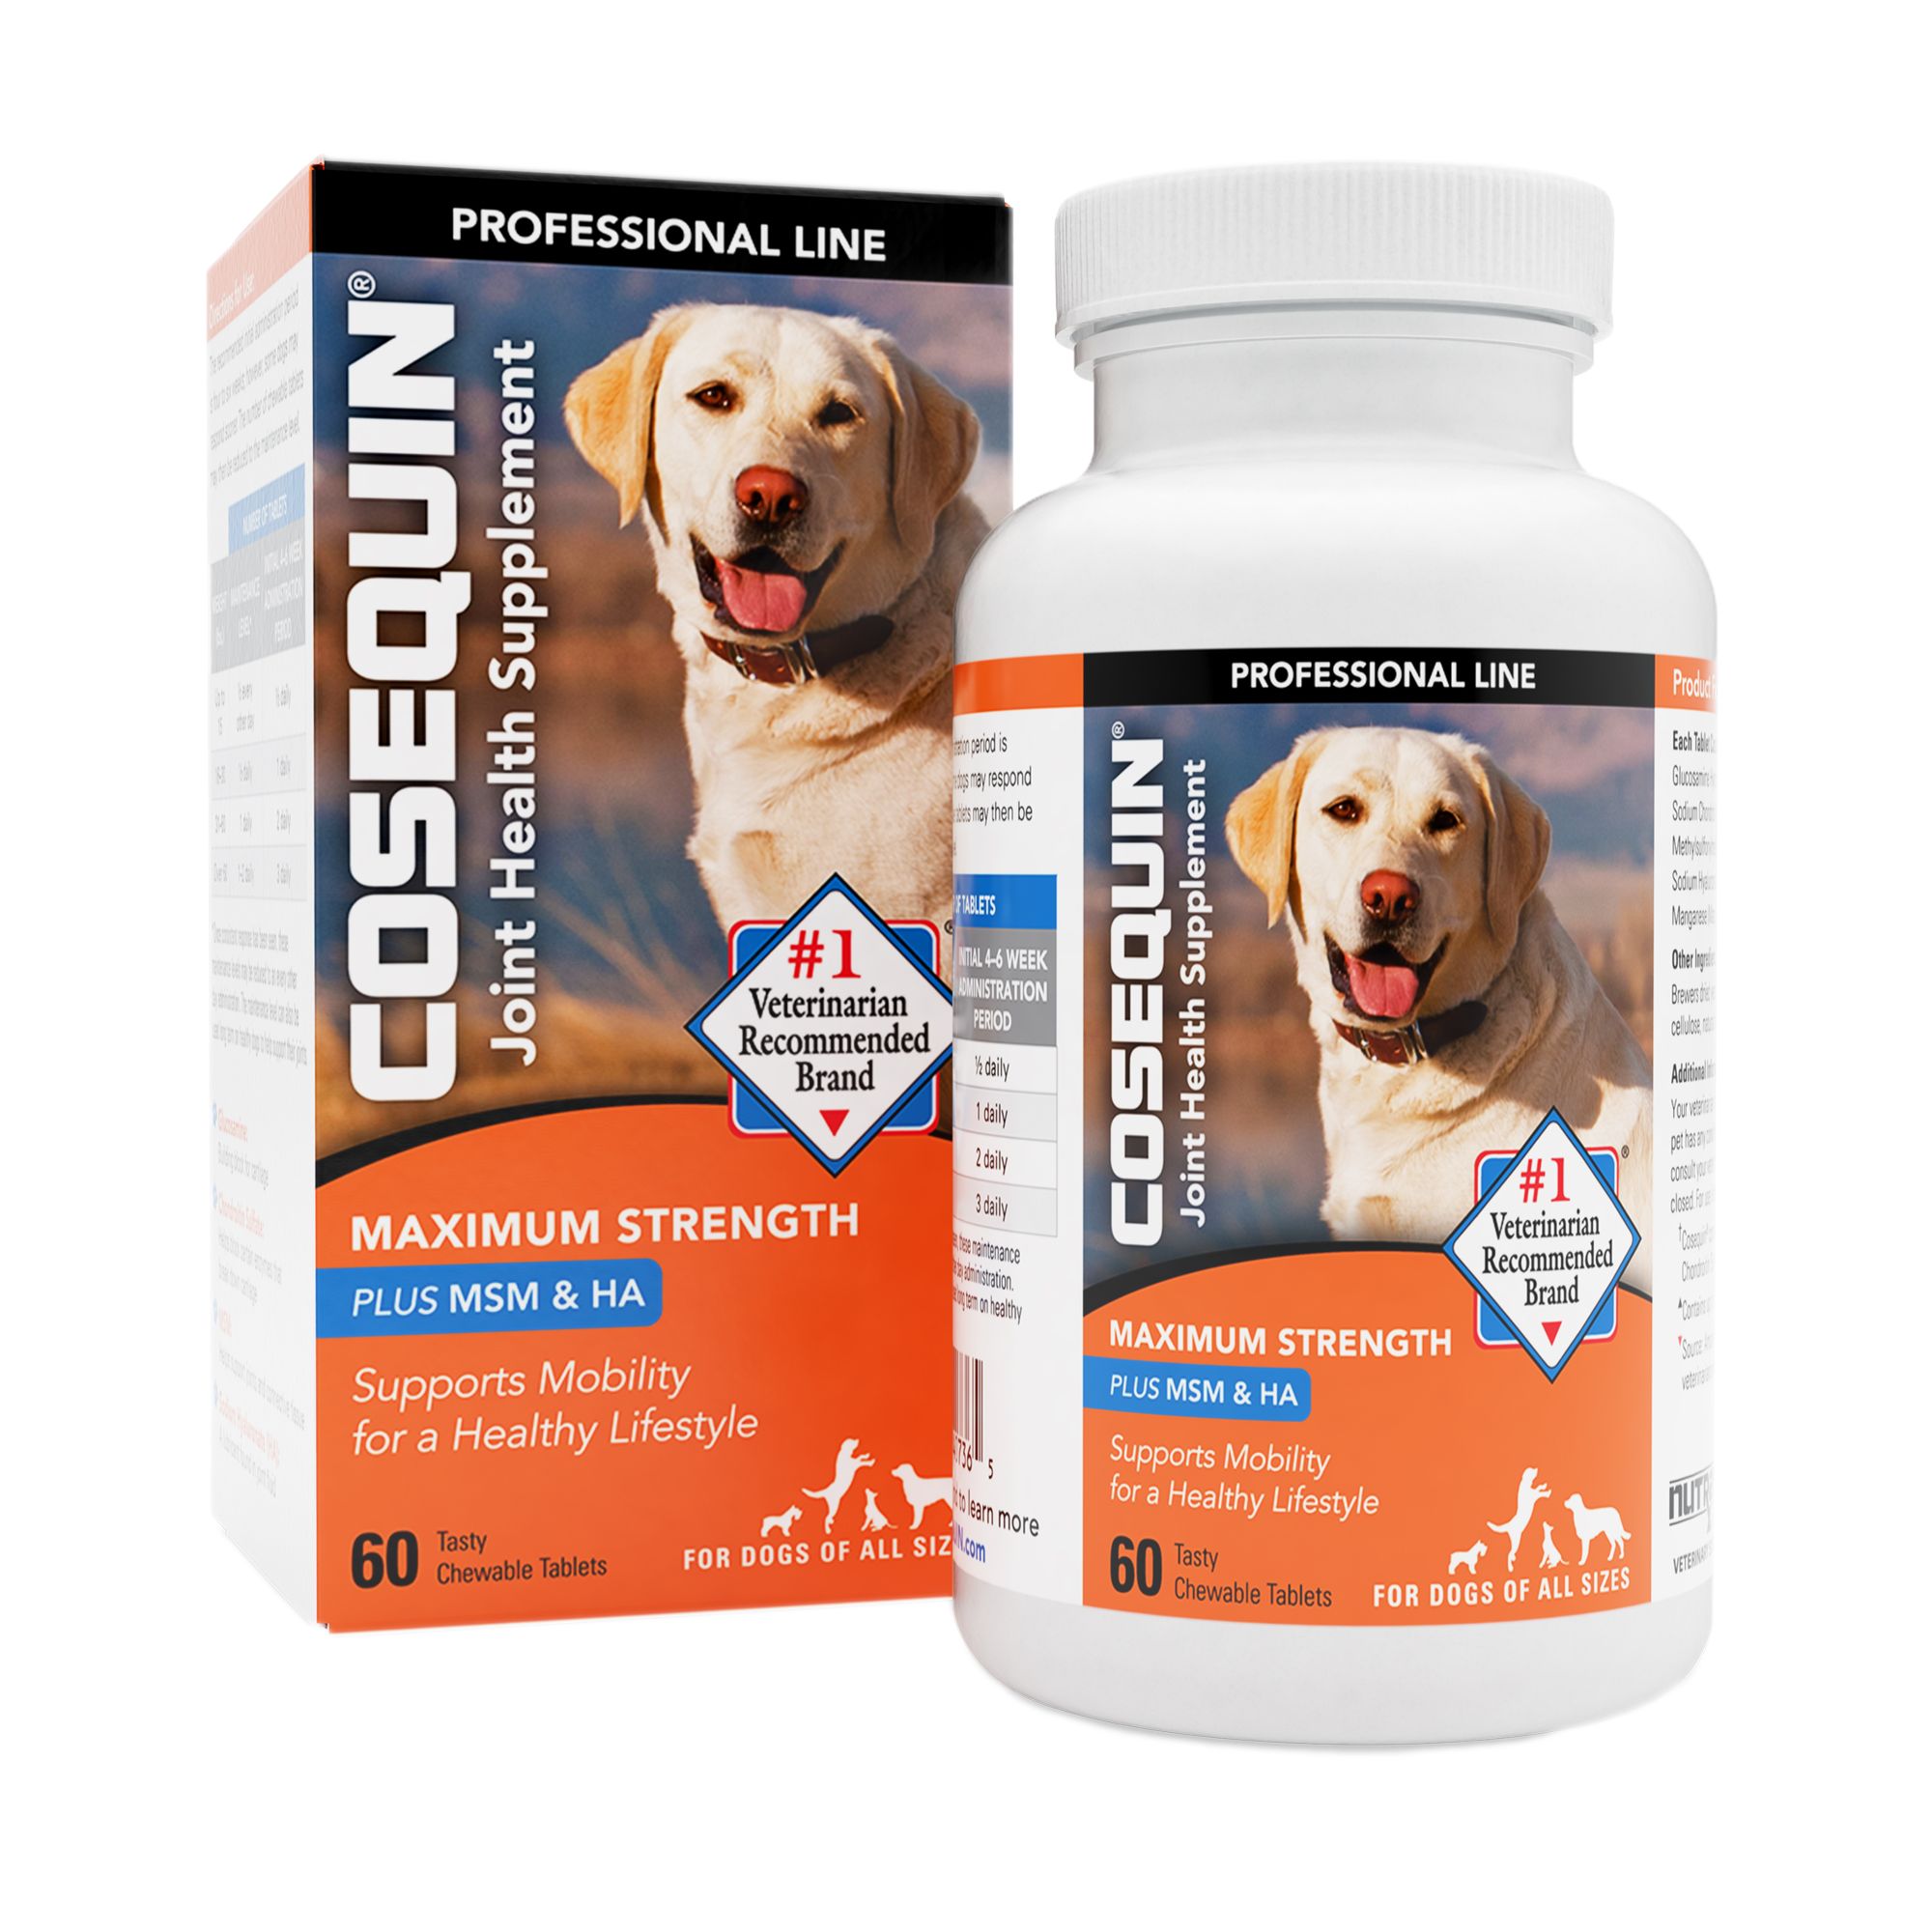 cosequin-nutramax-professional-joint-health-dog-supplement-chewable